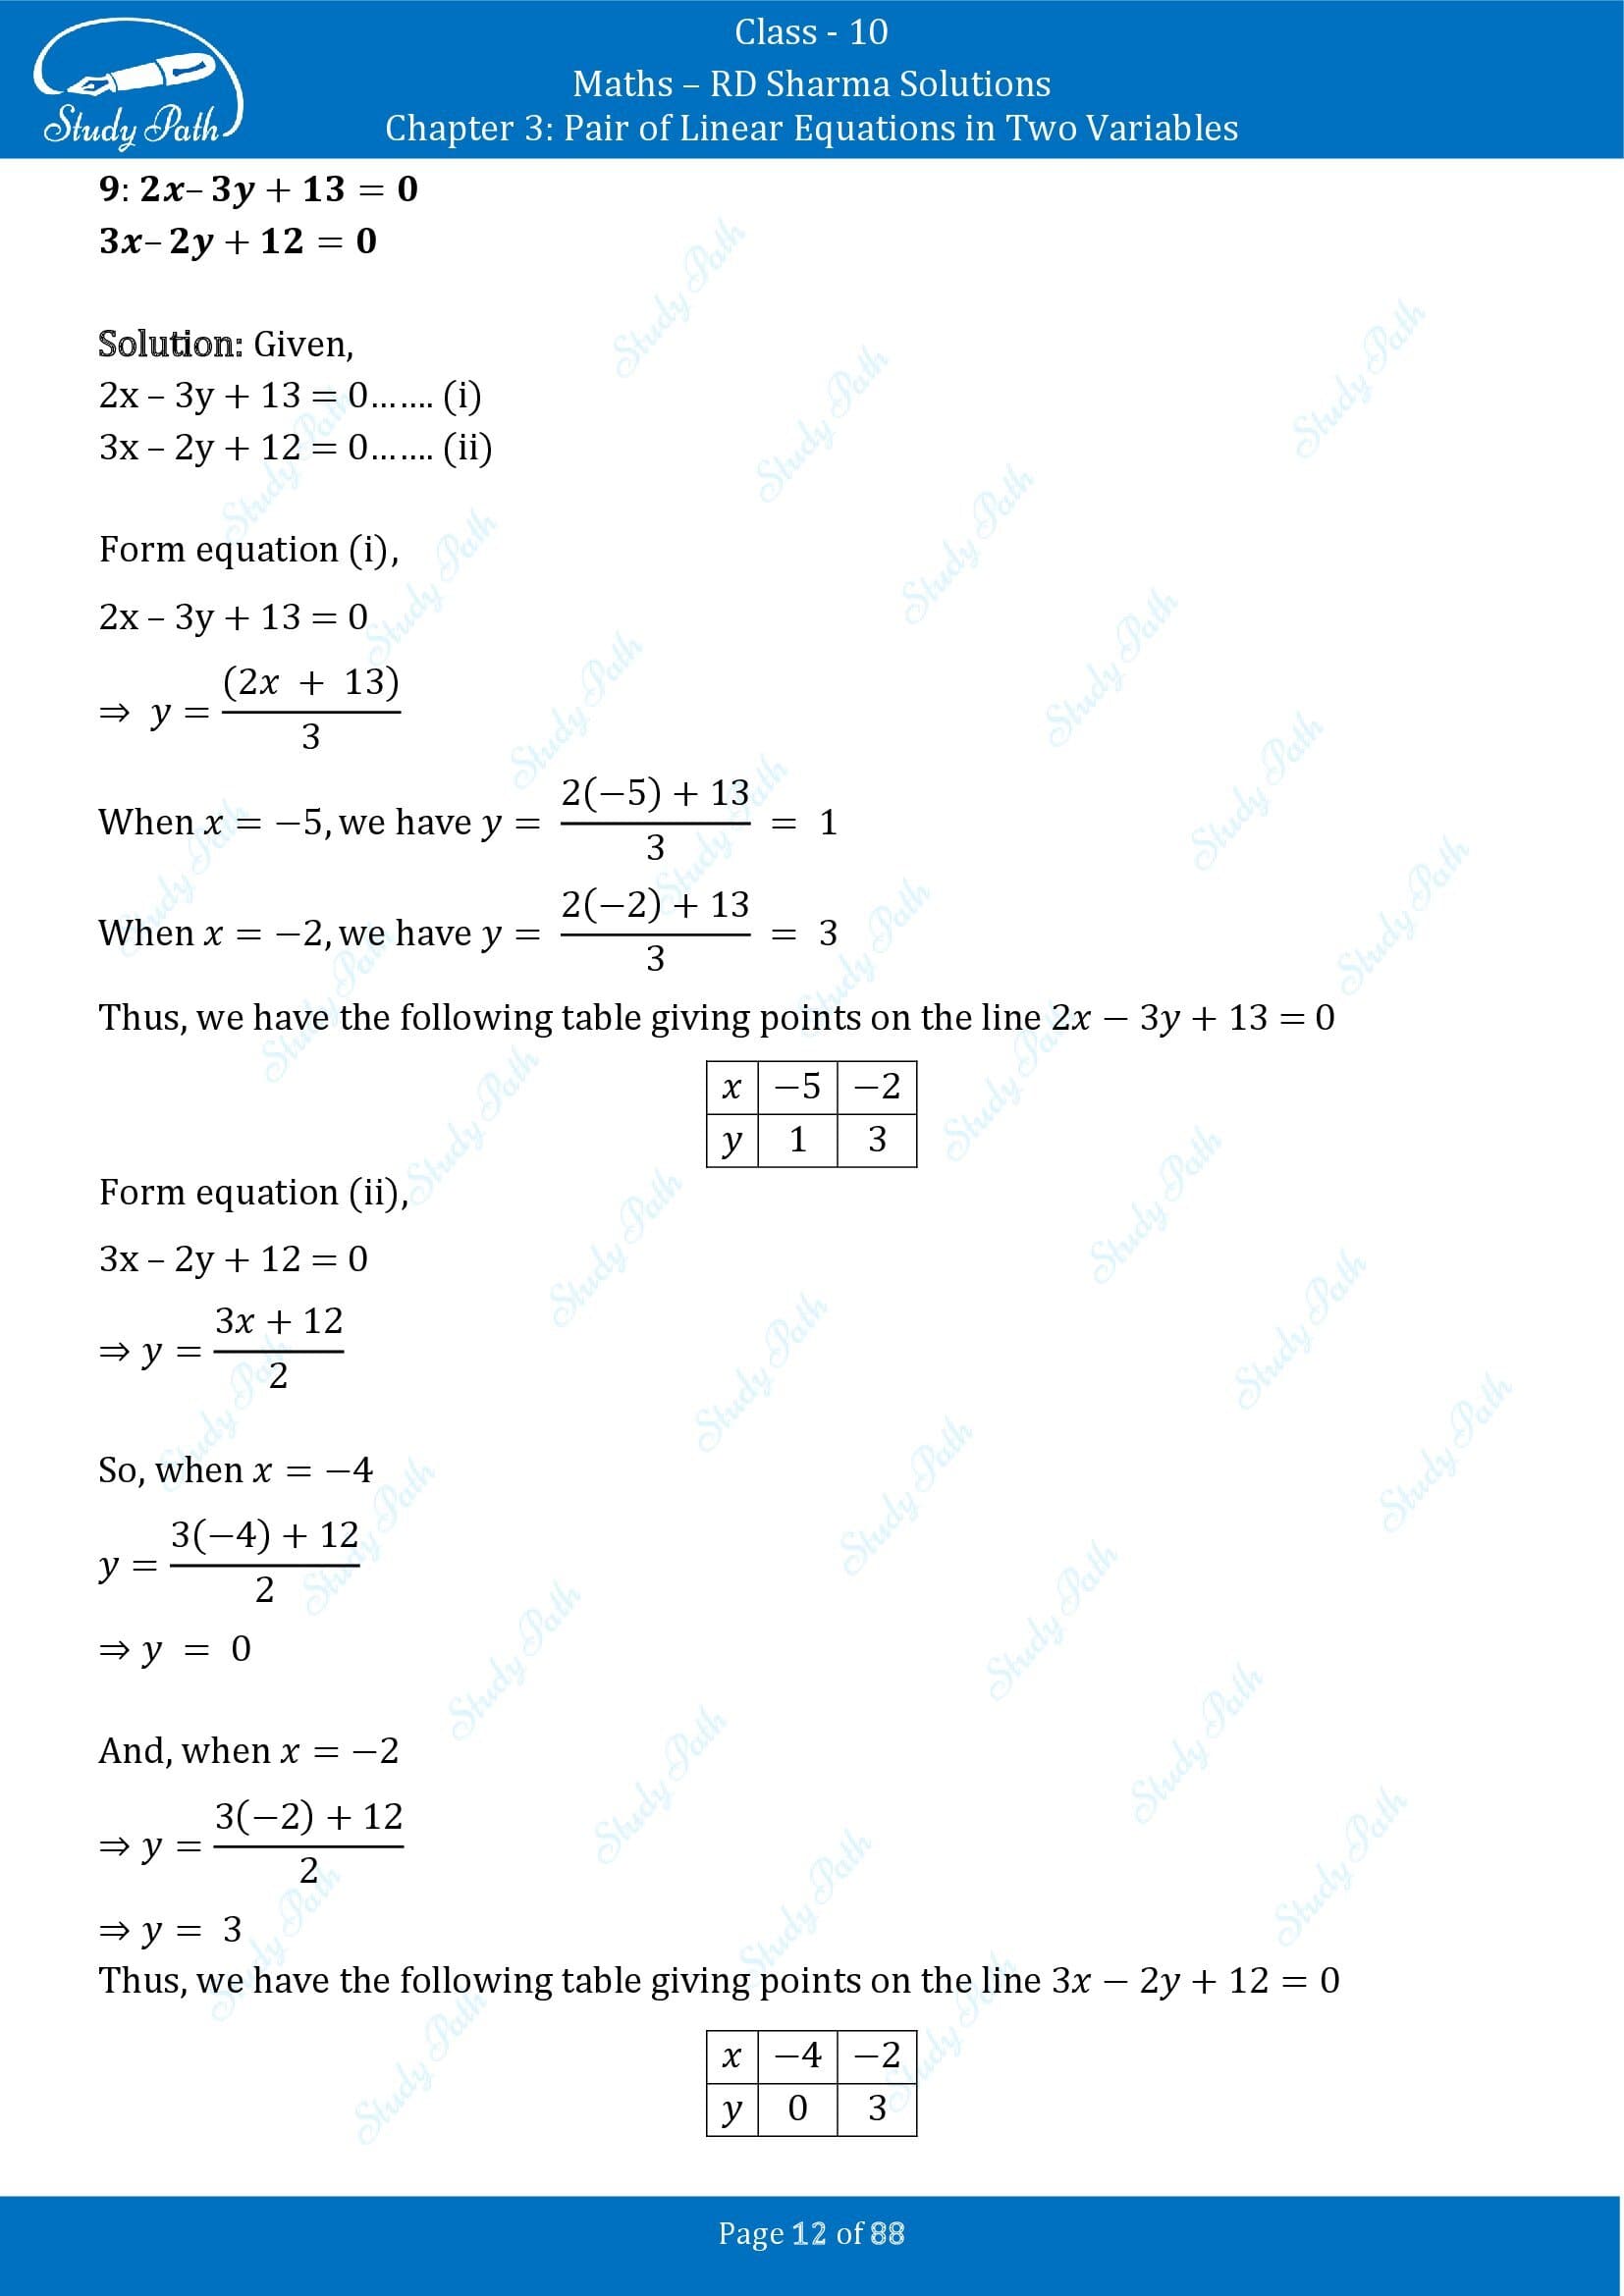 RD Sharma Solutions Class 10 Chapter 3 Pair of Linear Equations in Two Variables Exercise 3.2 00012